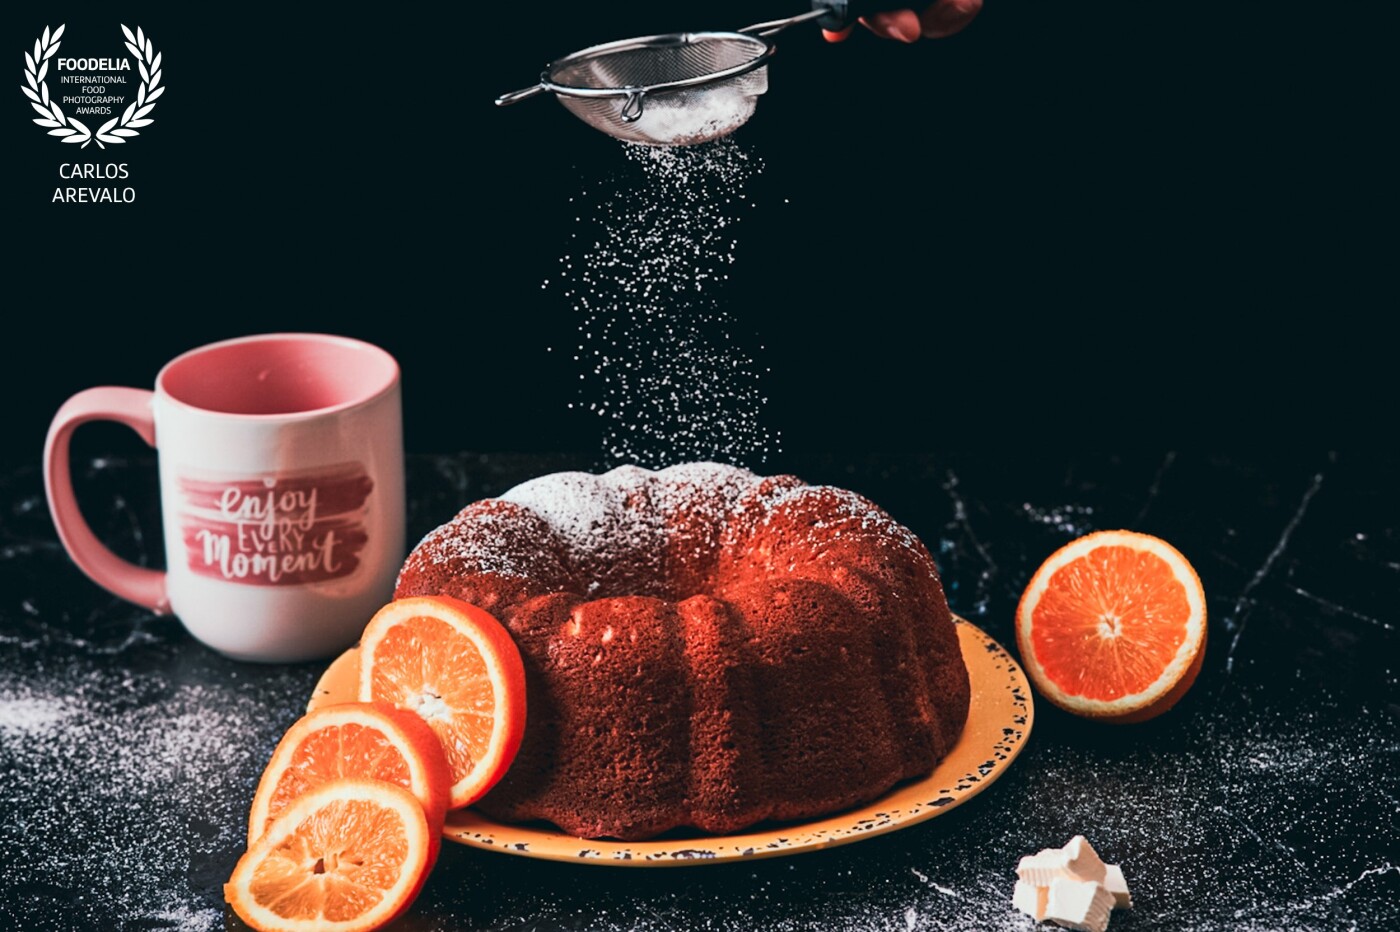 Part of the happiness is enjoy every single moment and if u add a little bit of sugar you gonna have a sweet <br />
<br />
Ingredients <br />
Flavor sugar orange and love <br />
Was cooked by Lisbeth Sanabria Reyes <br />
Photo by Carlos Arevalo